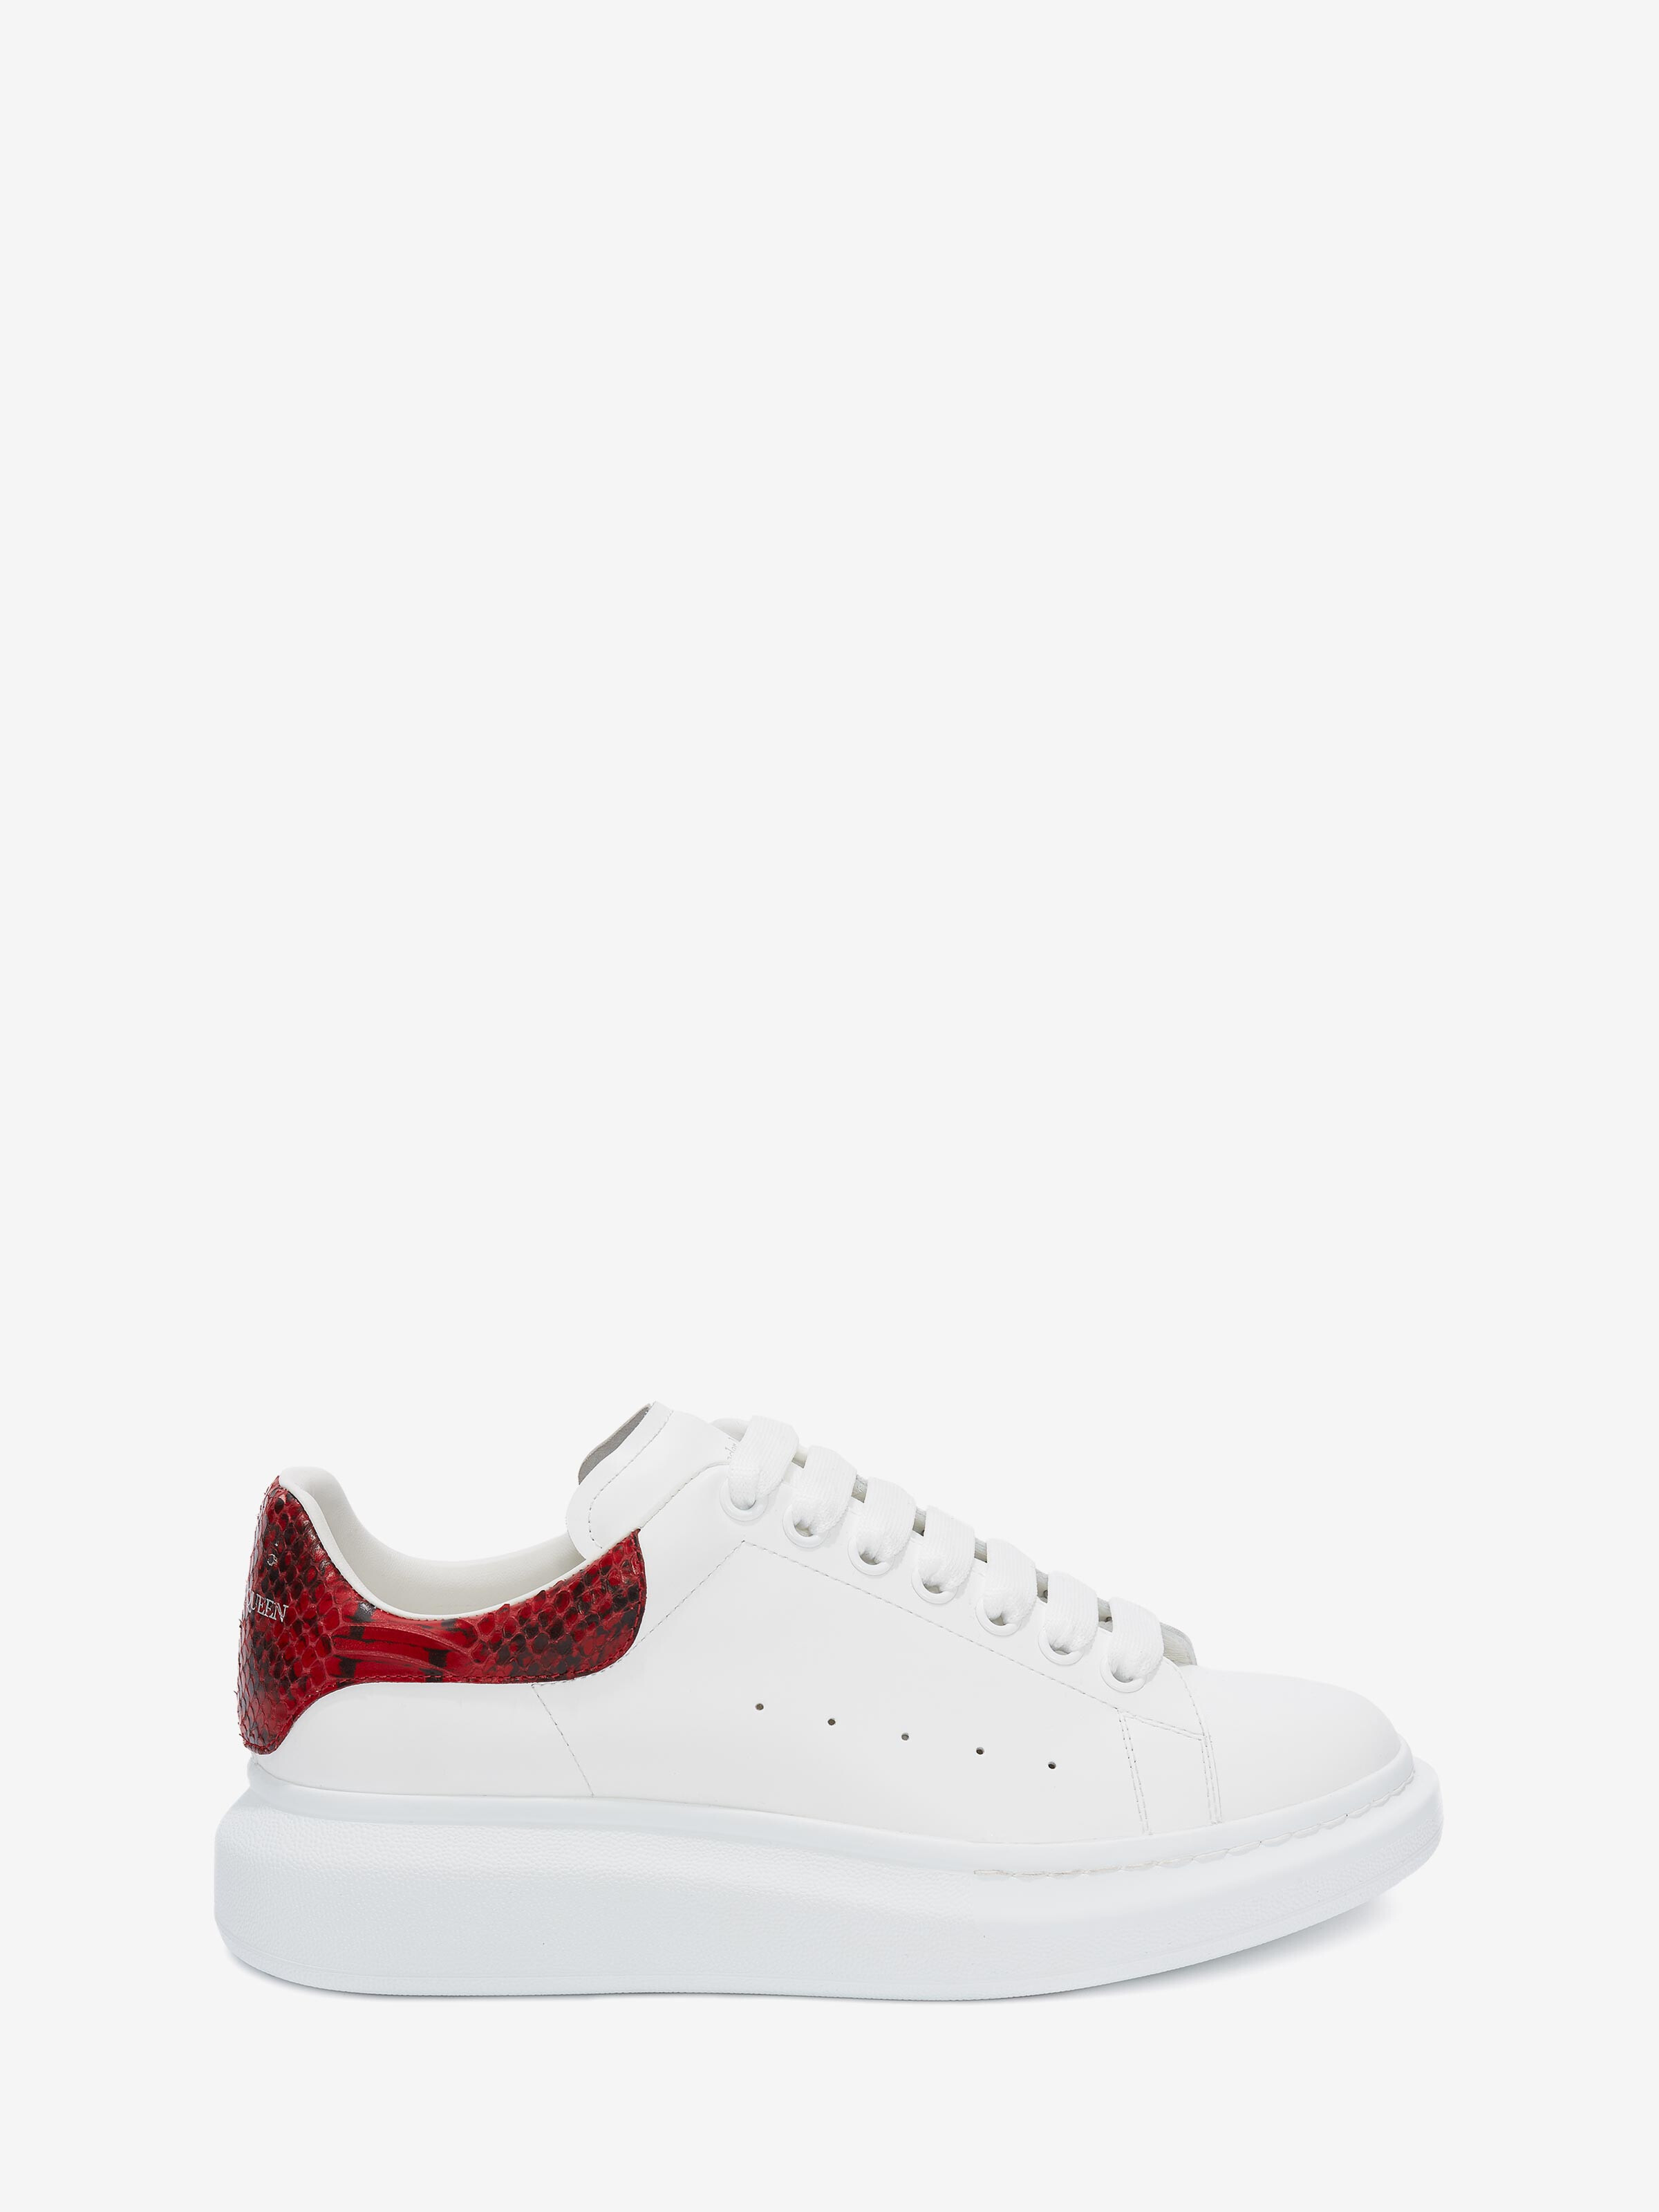 alexander mcqueen red and white